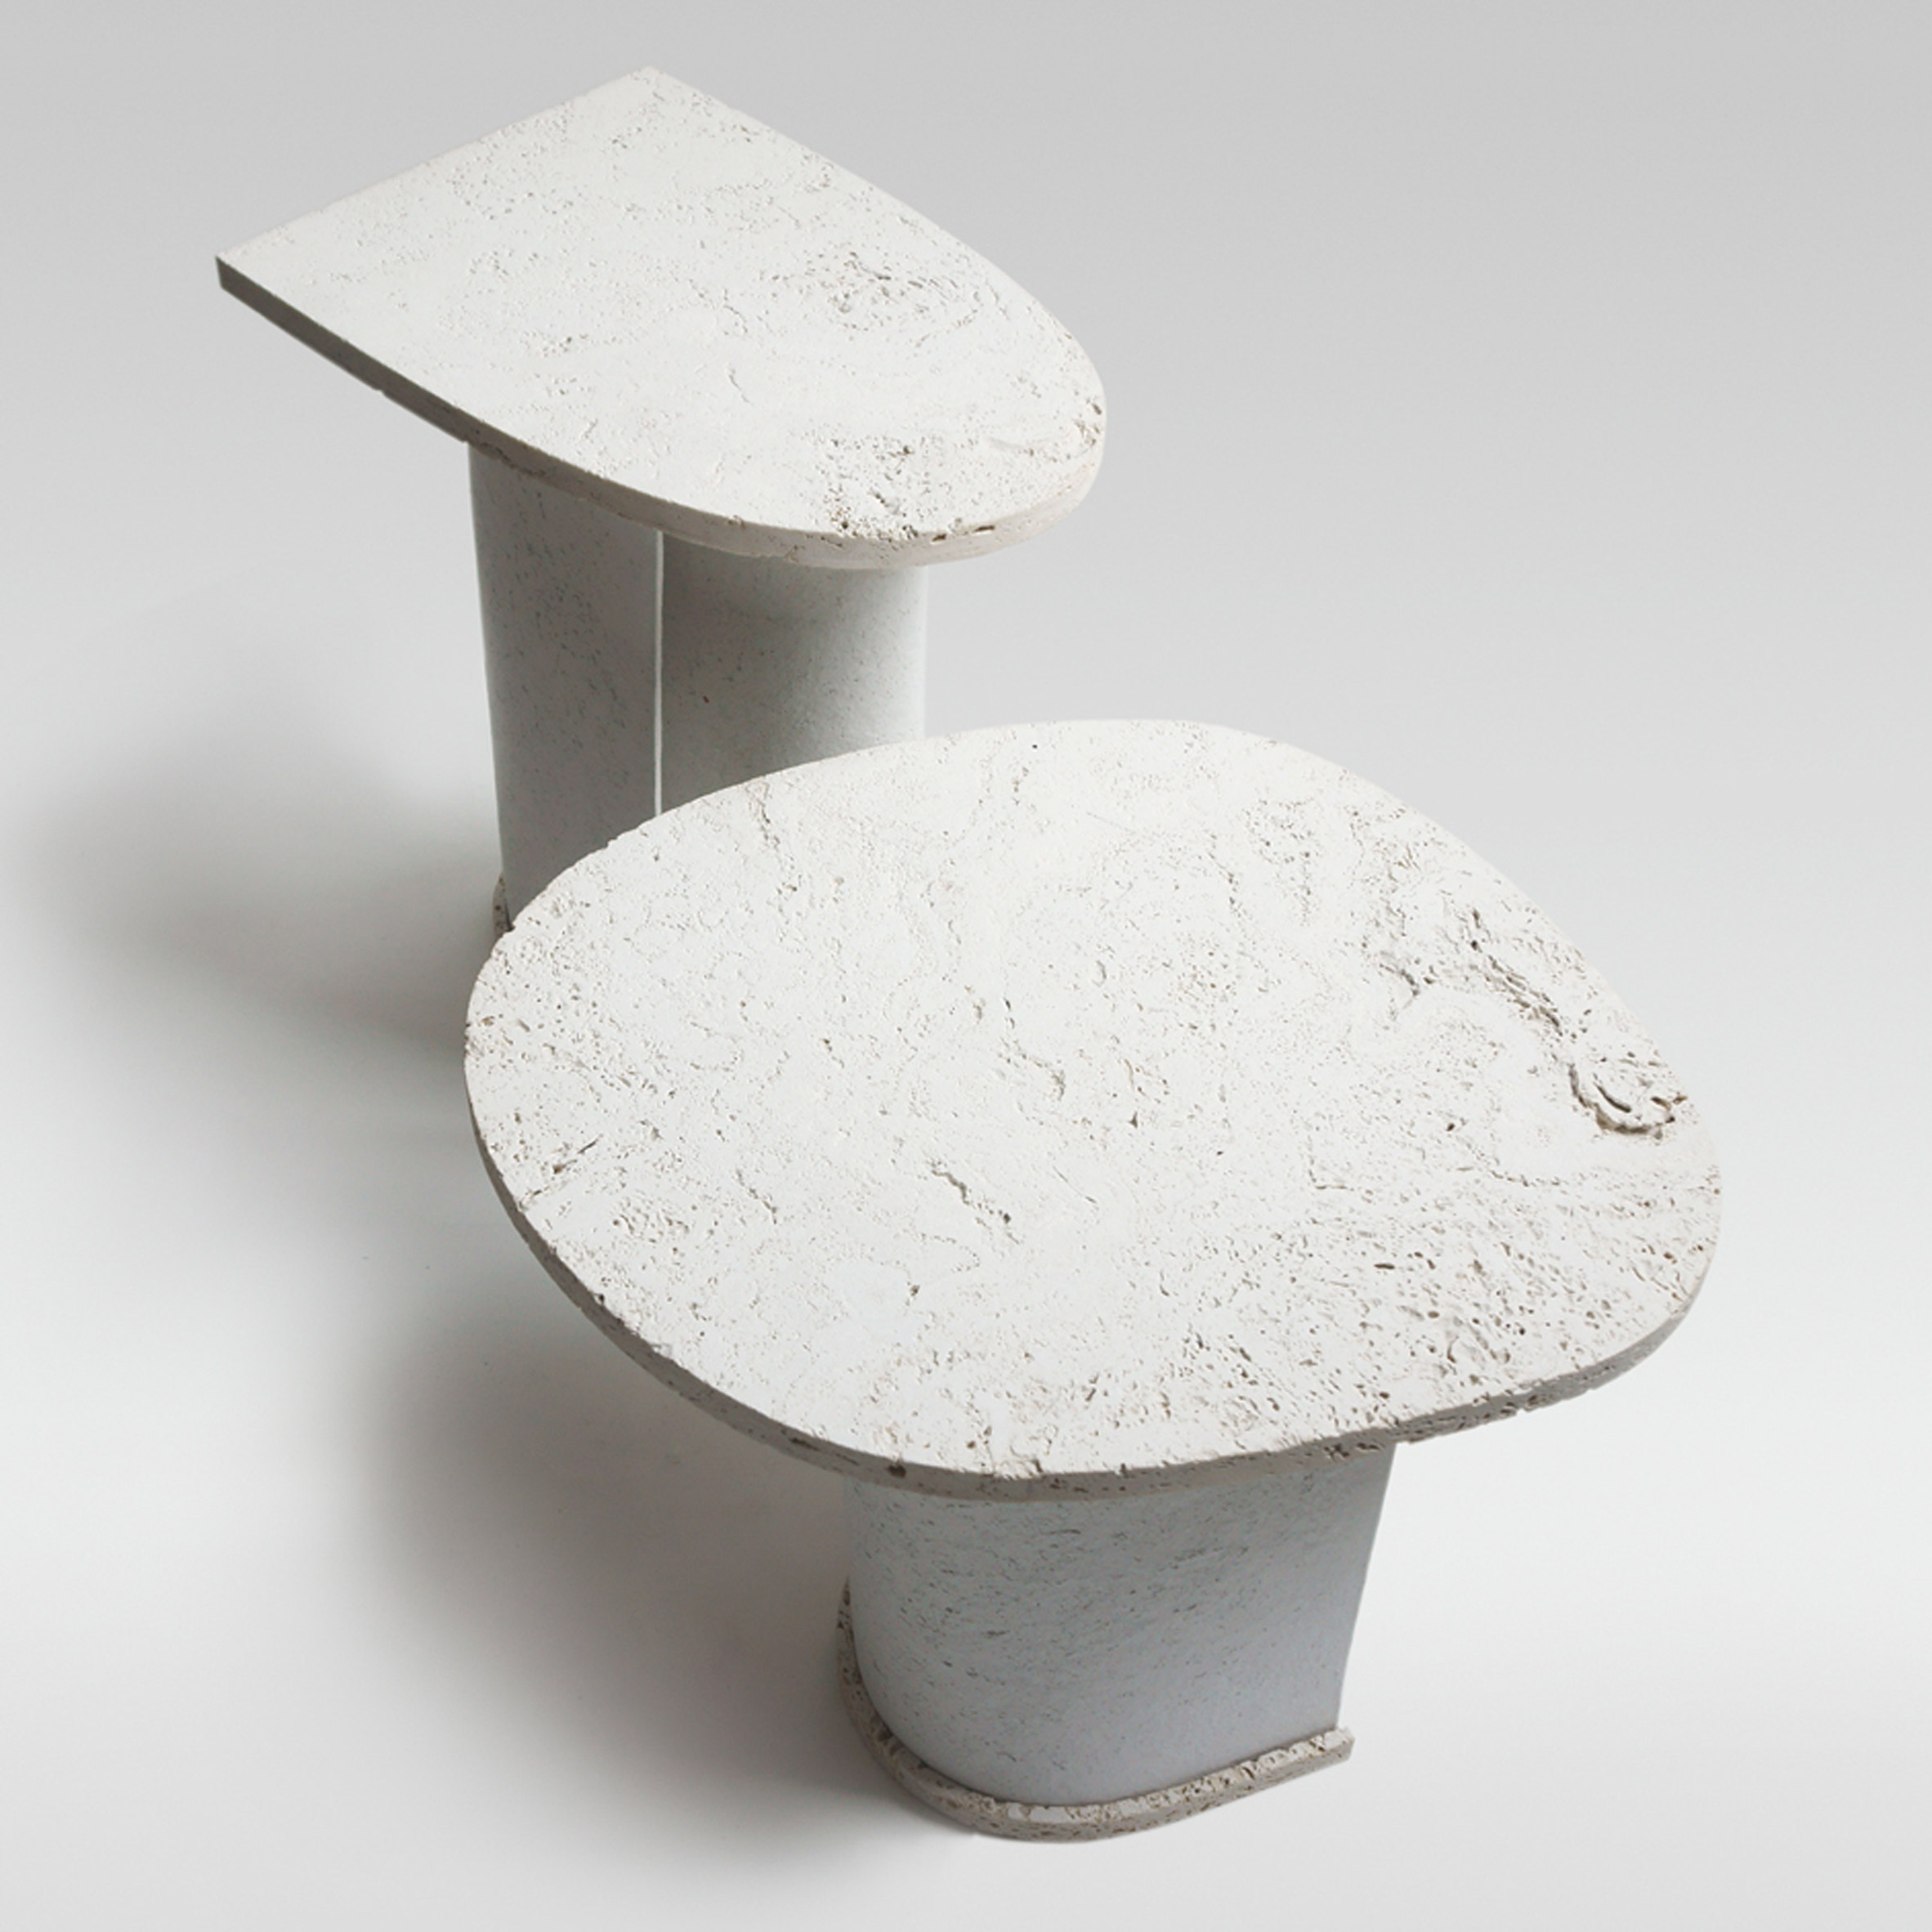 Charlotte Jonckheer makes side tables from recycled paper and stone dust